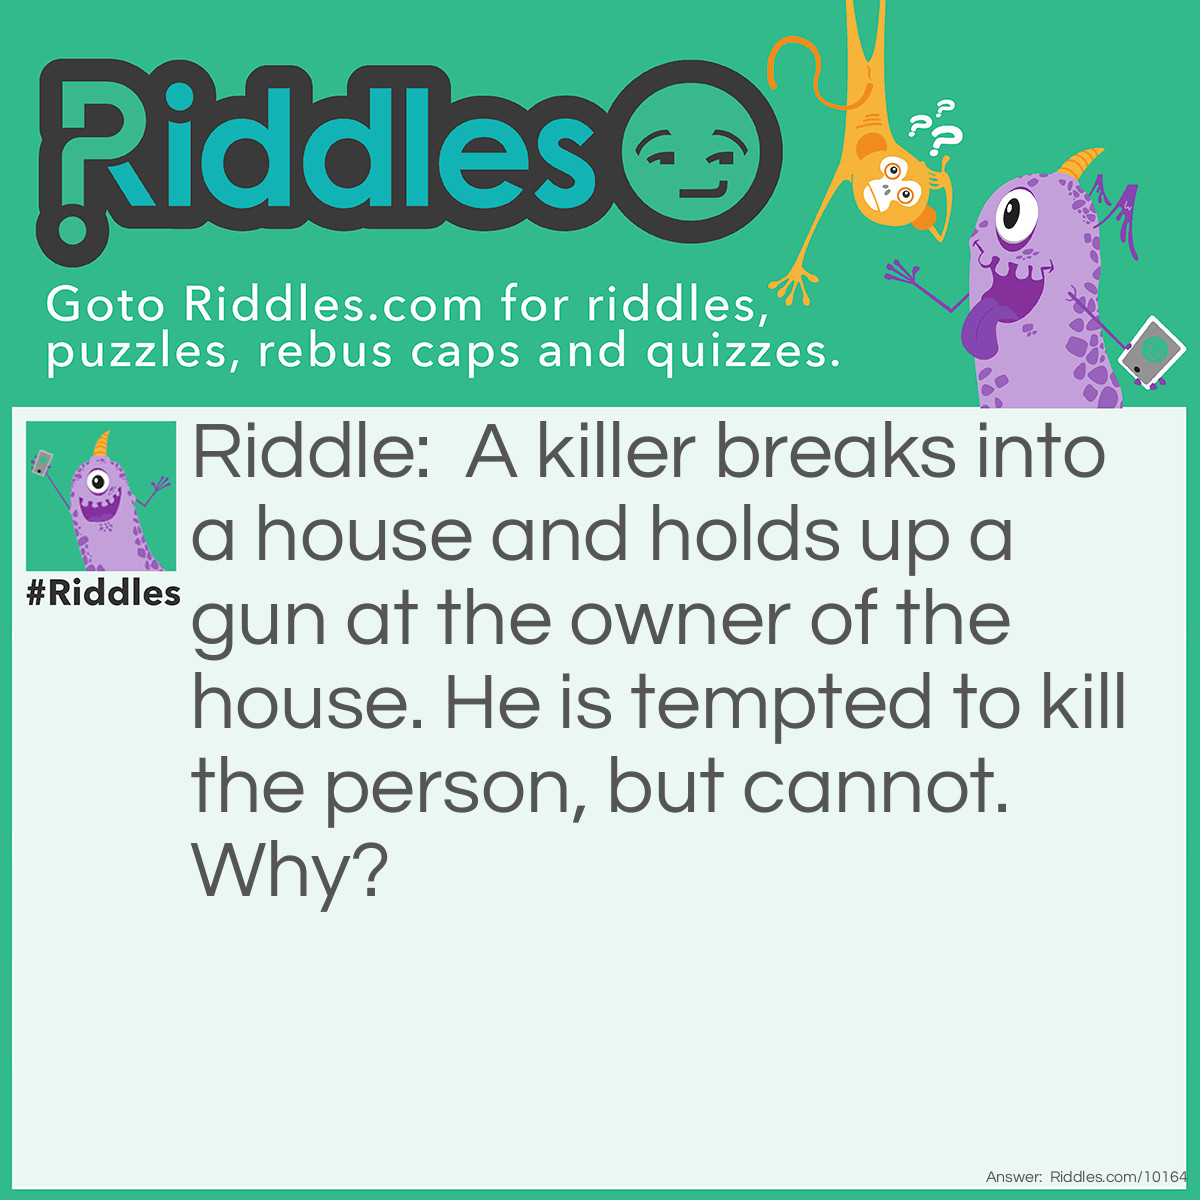 Riddle: A killer breaks into a house and holds up a gun at the owner of the house. He is tempted to kill the person, but cannot. Why? Answer: Because the owner was in the LIVING room!